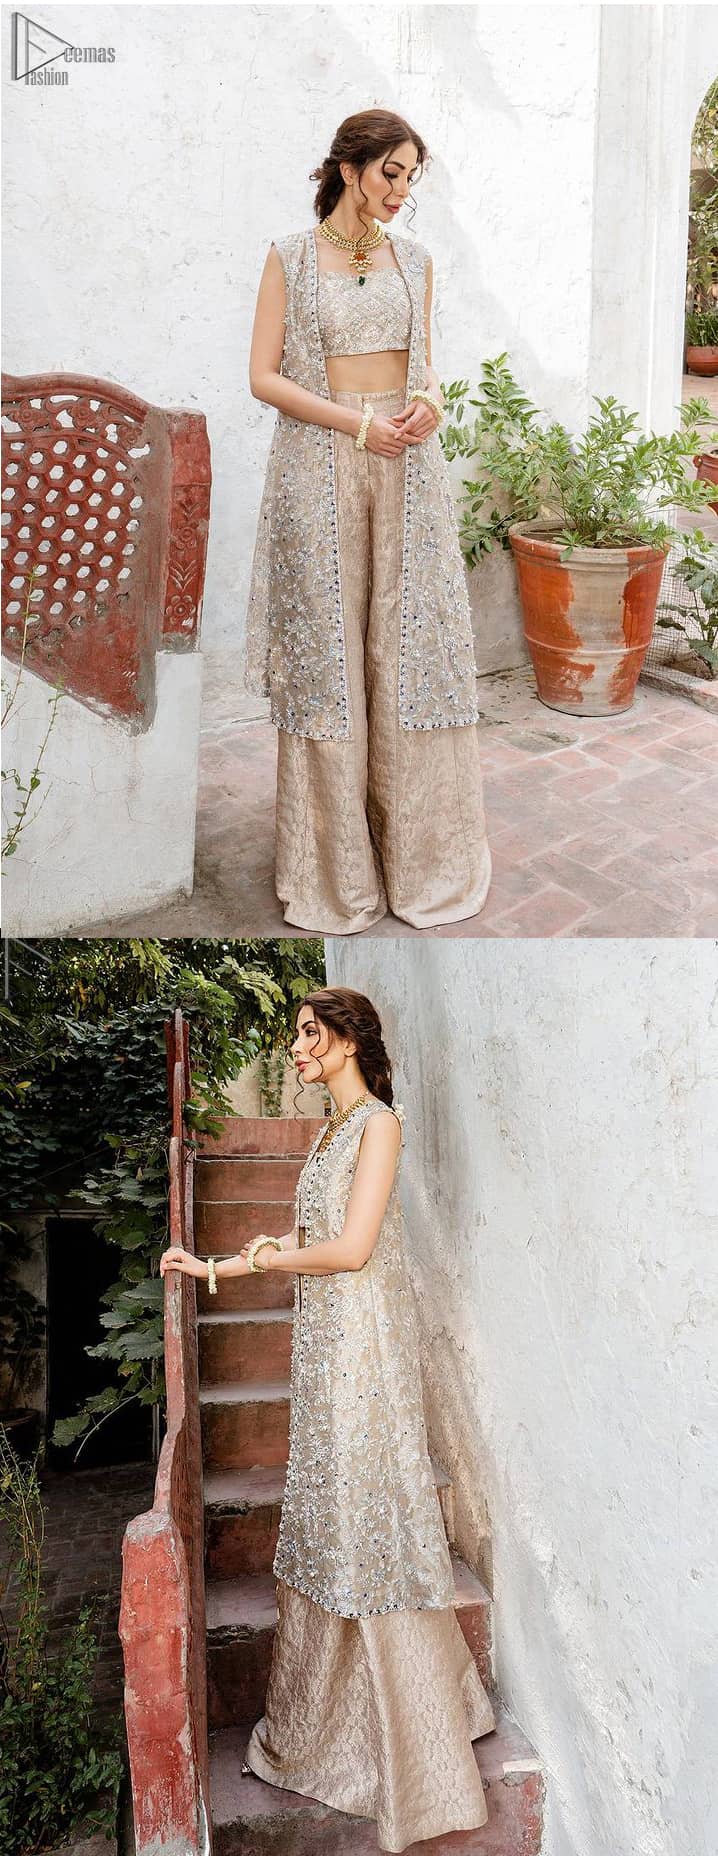 The dress is made with pure Katan Banarasi Jamawar that comes with a magnificent net choli followed by the perfect palazzo pants.Pakistani Party Dress - Beige Open Shirt n Blouse - Palazzo Pants. This attractive semi-formal dress would delight your day either at party wear.